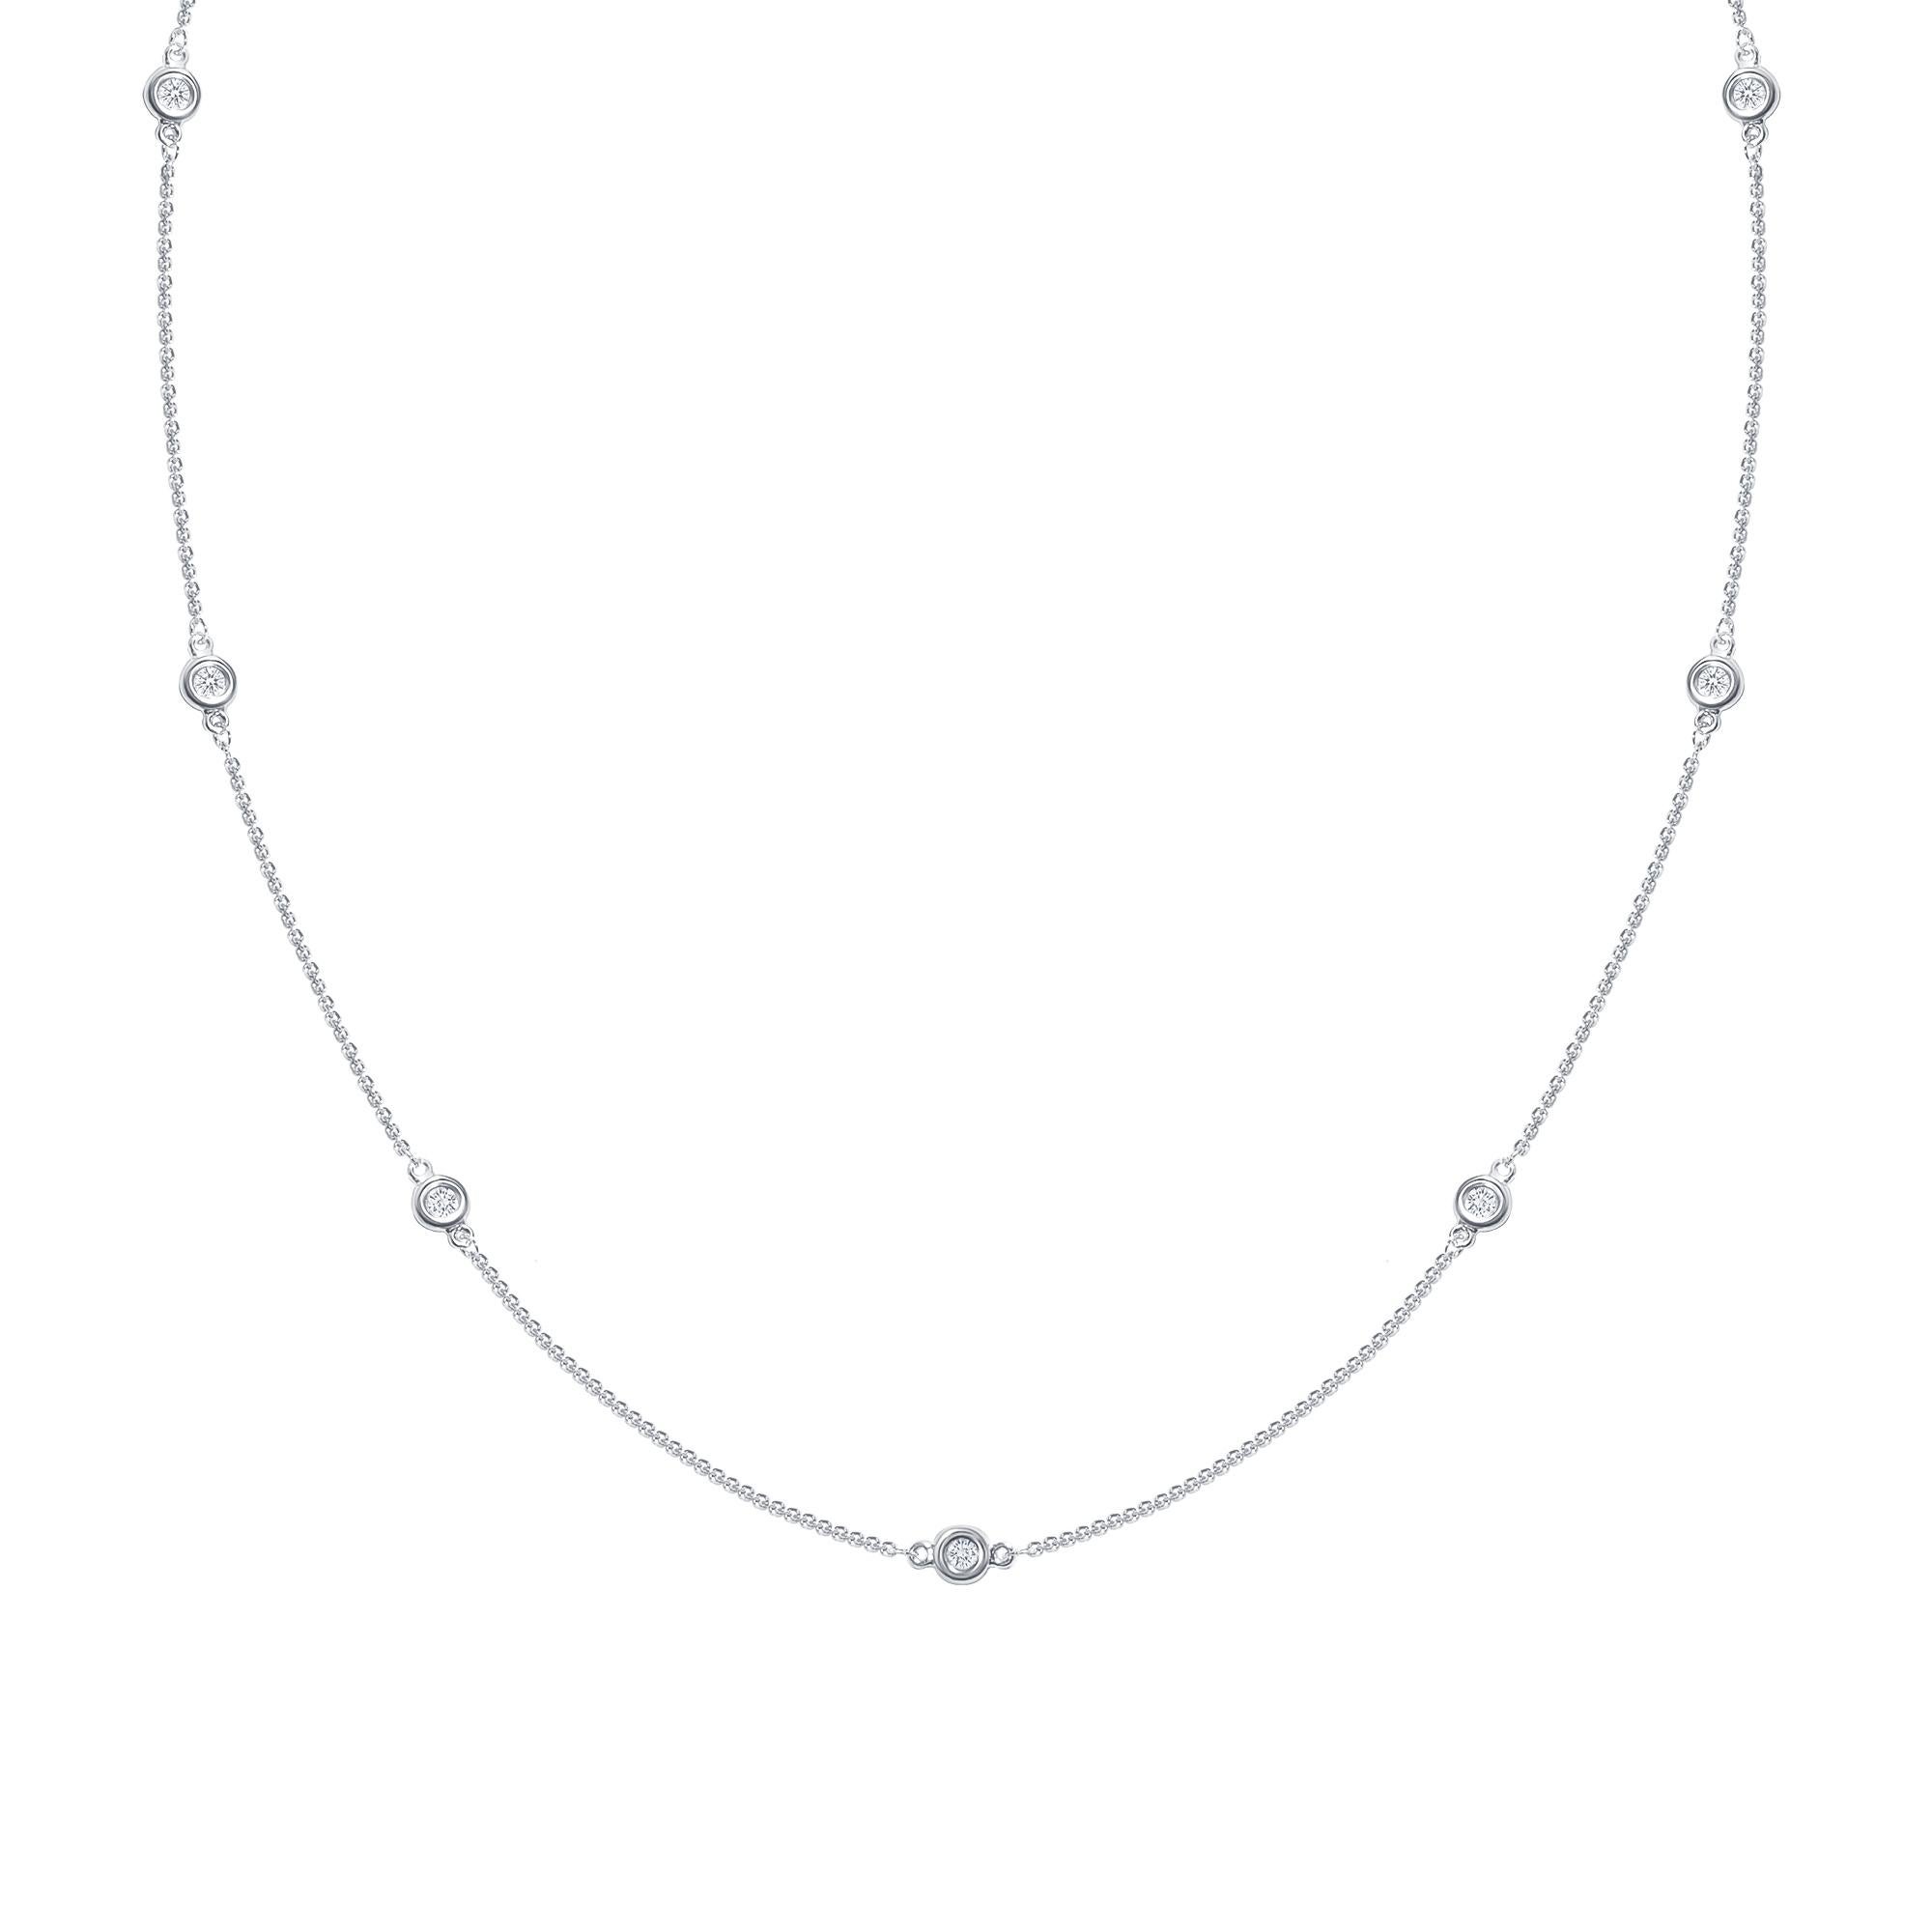 Eight elegant round diamonds set in a bezel setting along a 14k gold chain necklace.

Gold: 14K Gold
Number of Diamonds: Eight
Gold Color: White Gold
Carat: 0.50 Carats
Necklace Length: 16 Inches
Diamond Clarity: VS
Diamond Color: F
Chain Type: